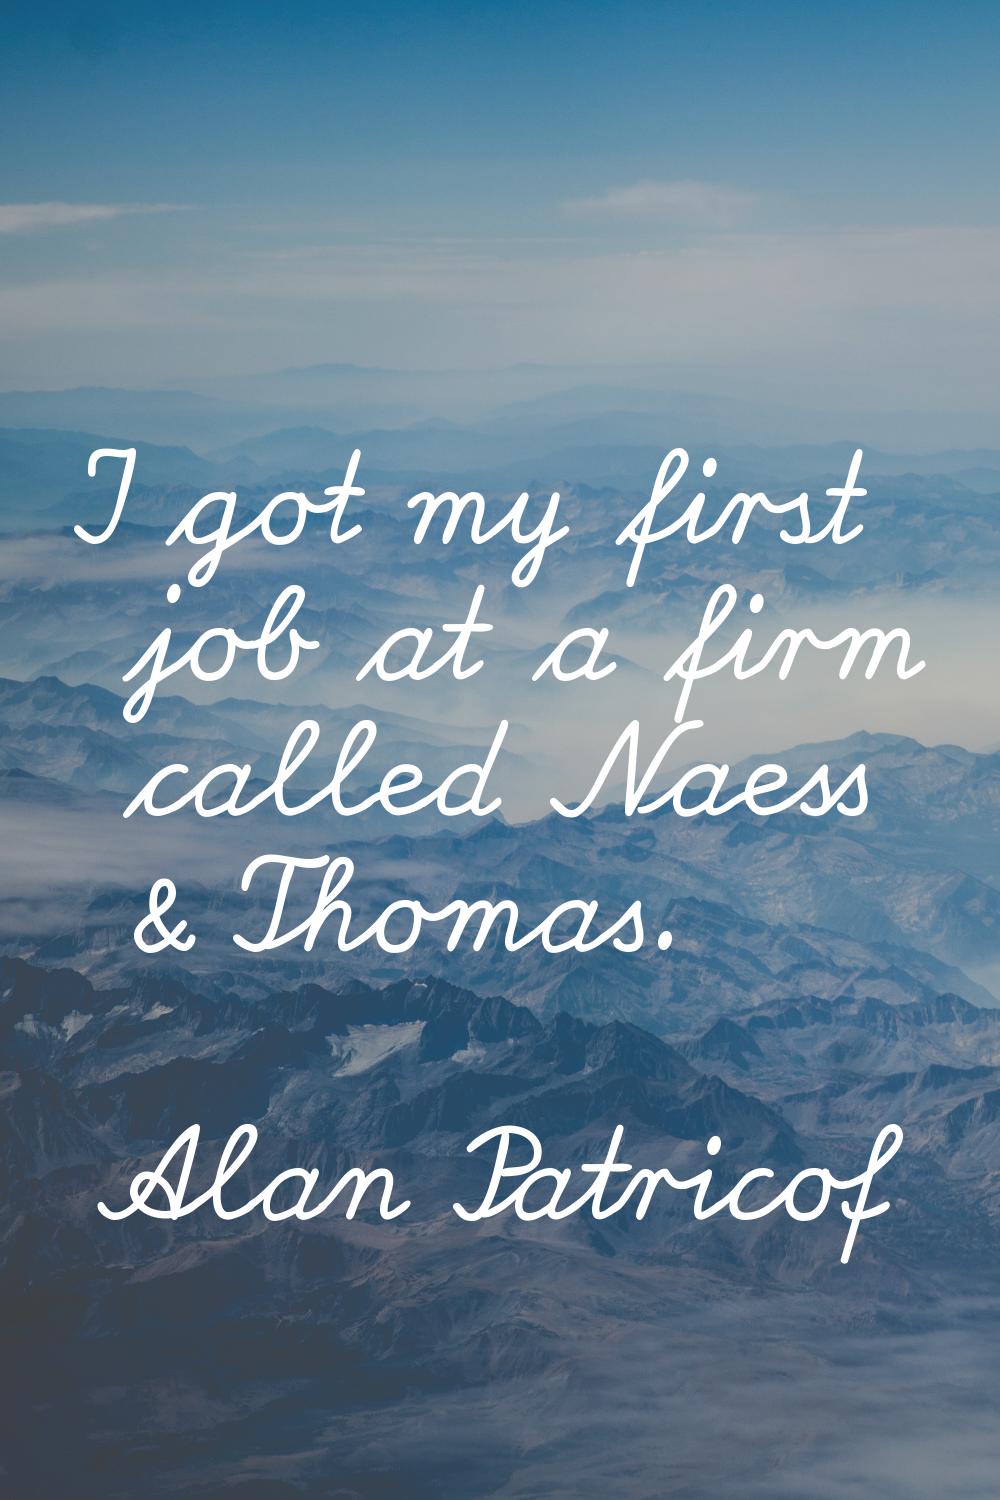 I got my first job at a firm called Naess & Thomas.